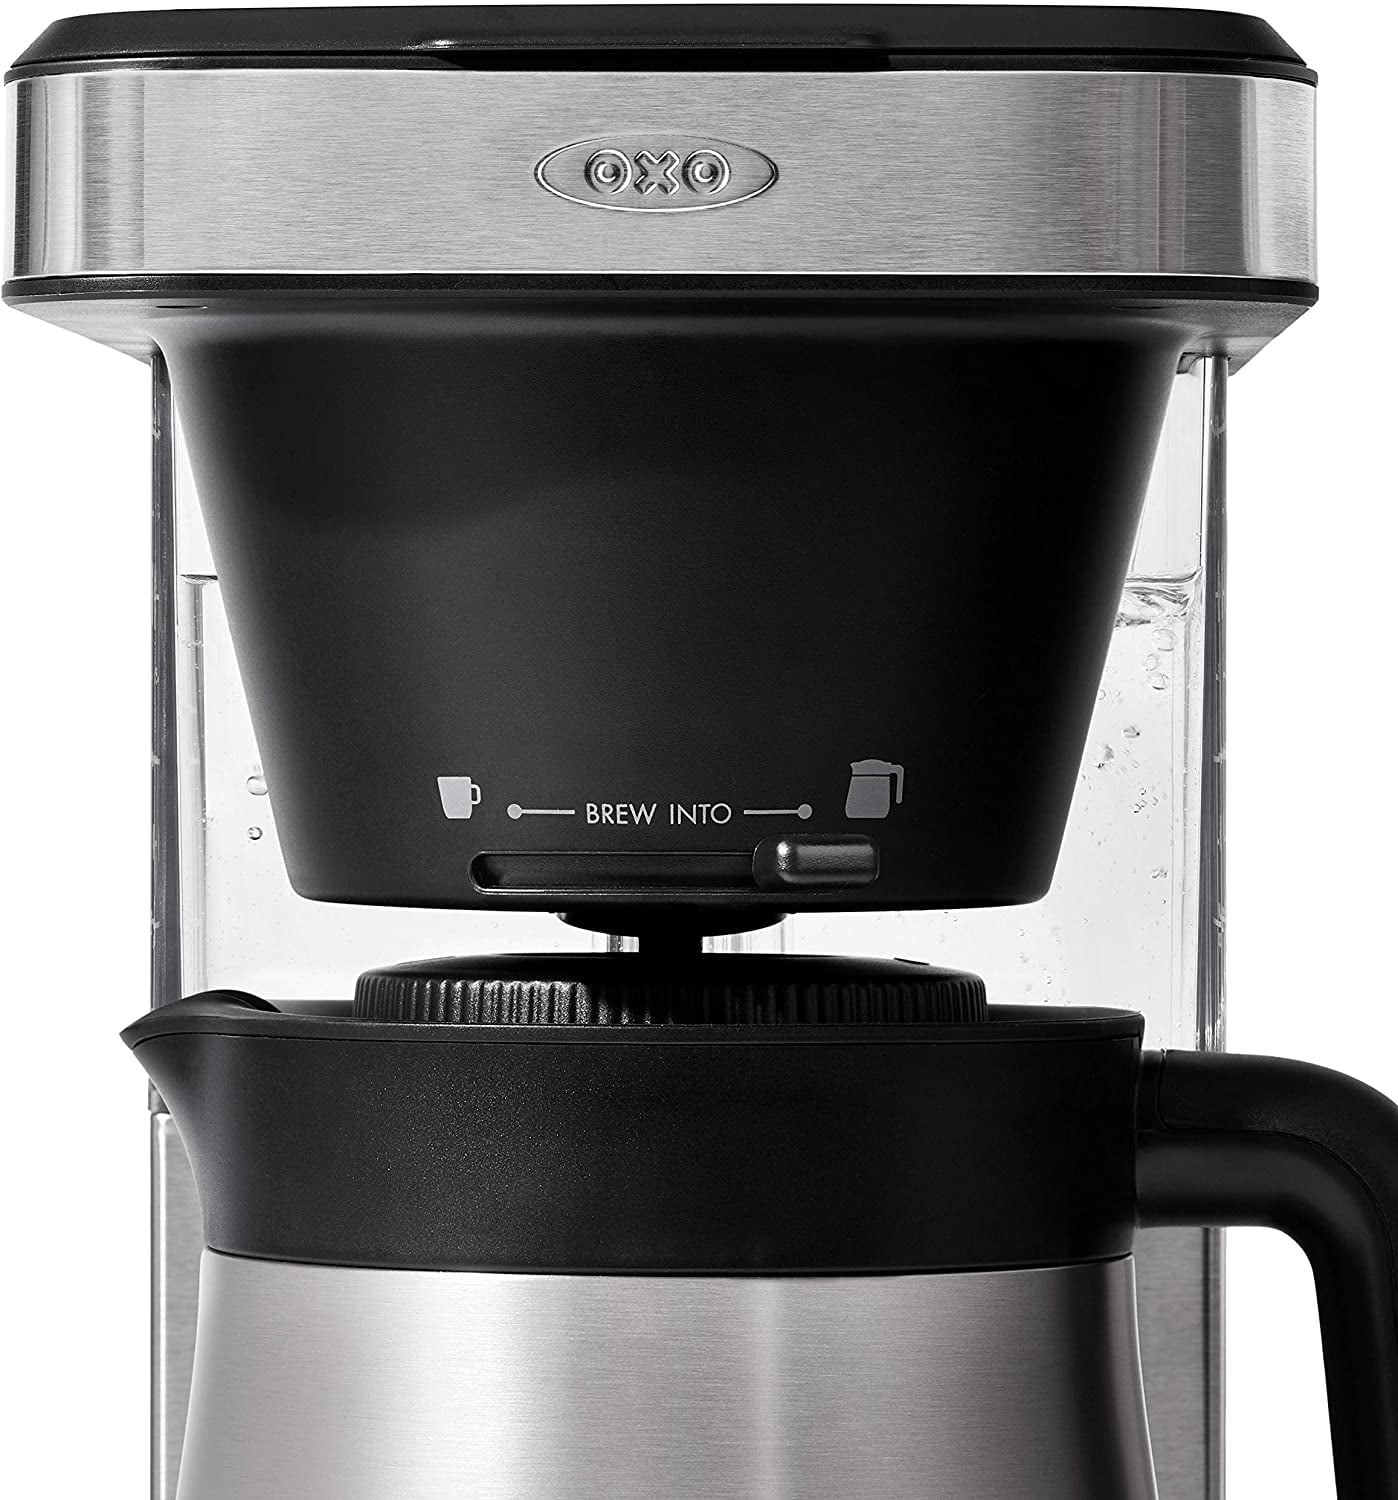  OXO Brew 8 Cup Coffee Maker, Stainless Steel & Brew